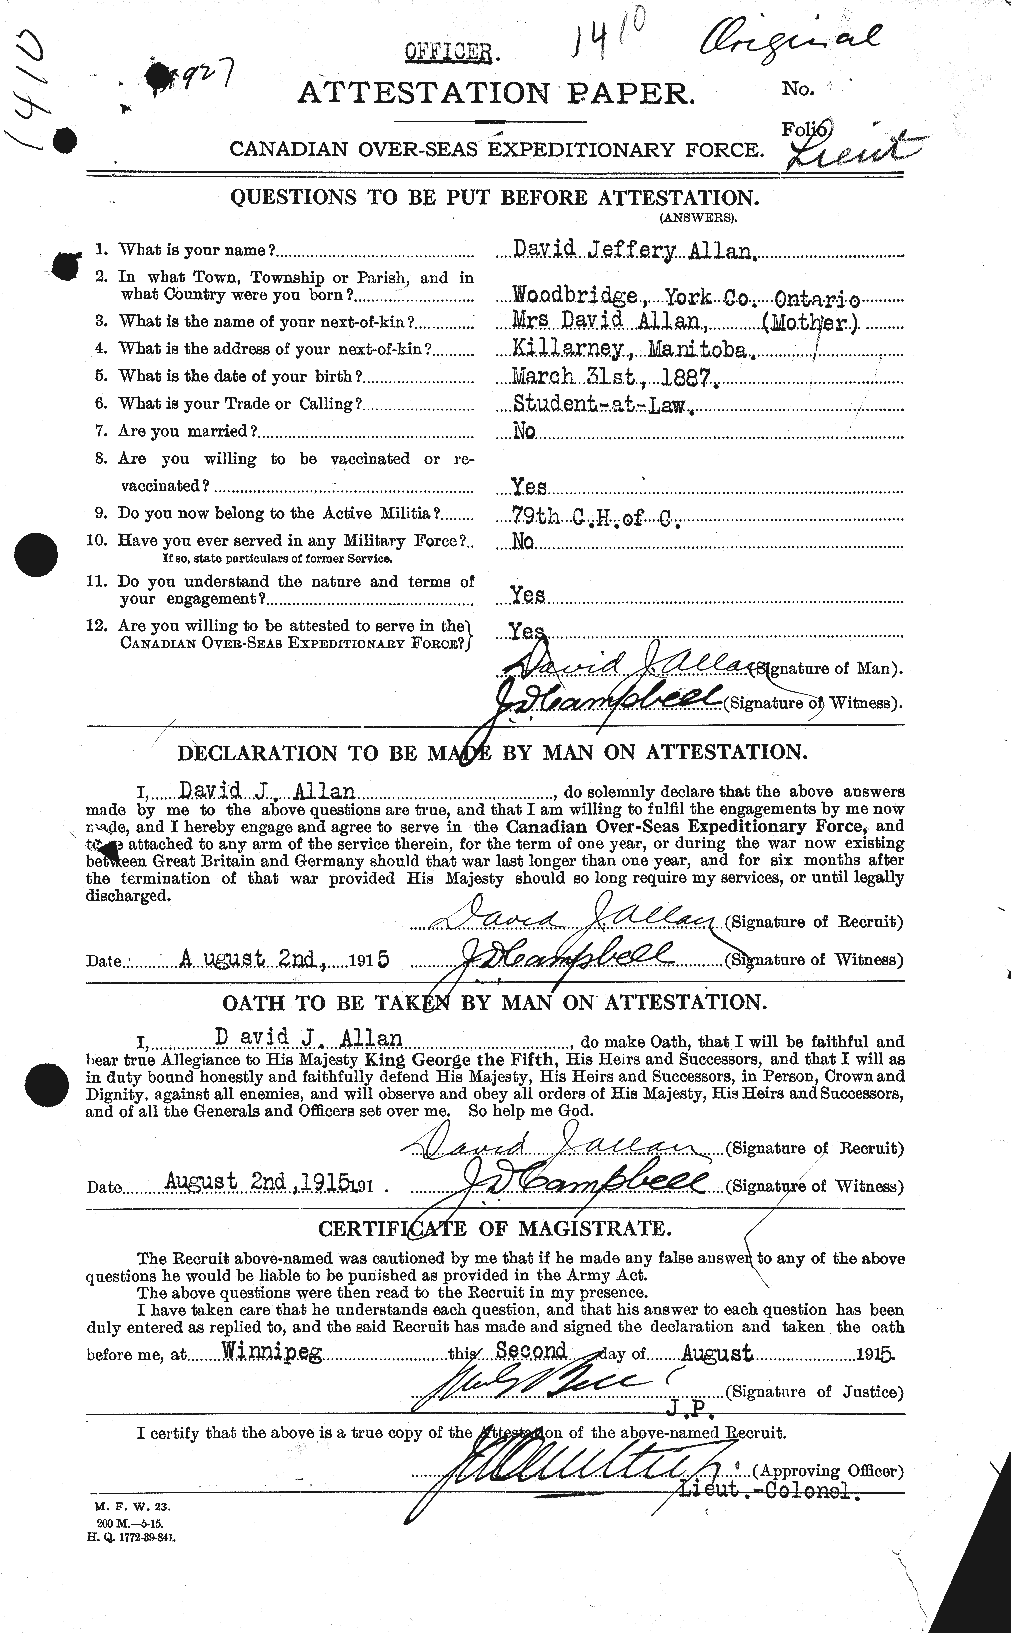 Personnel Records of the First World War - CEF 205295a